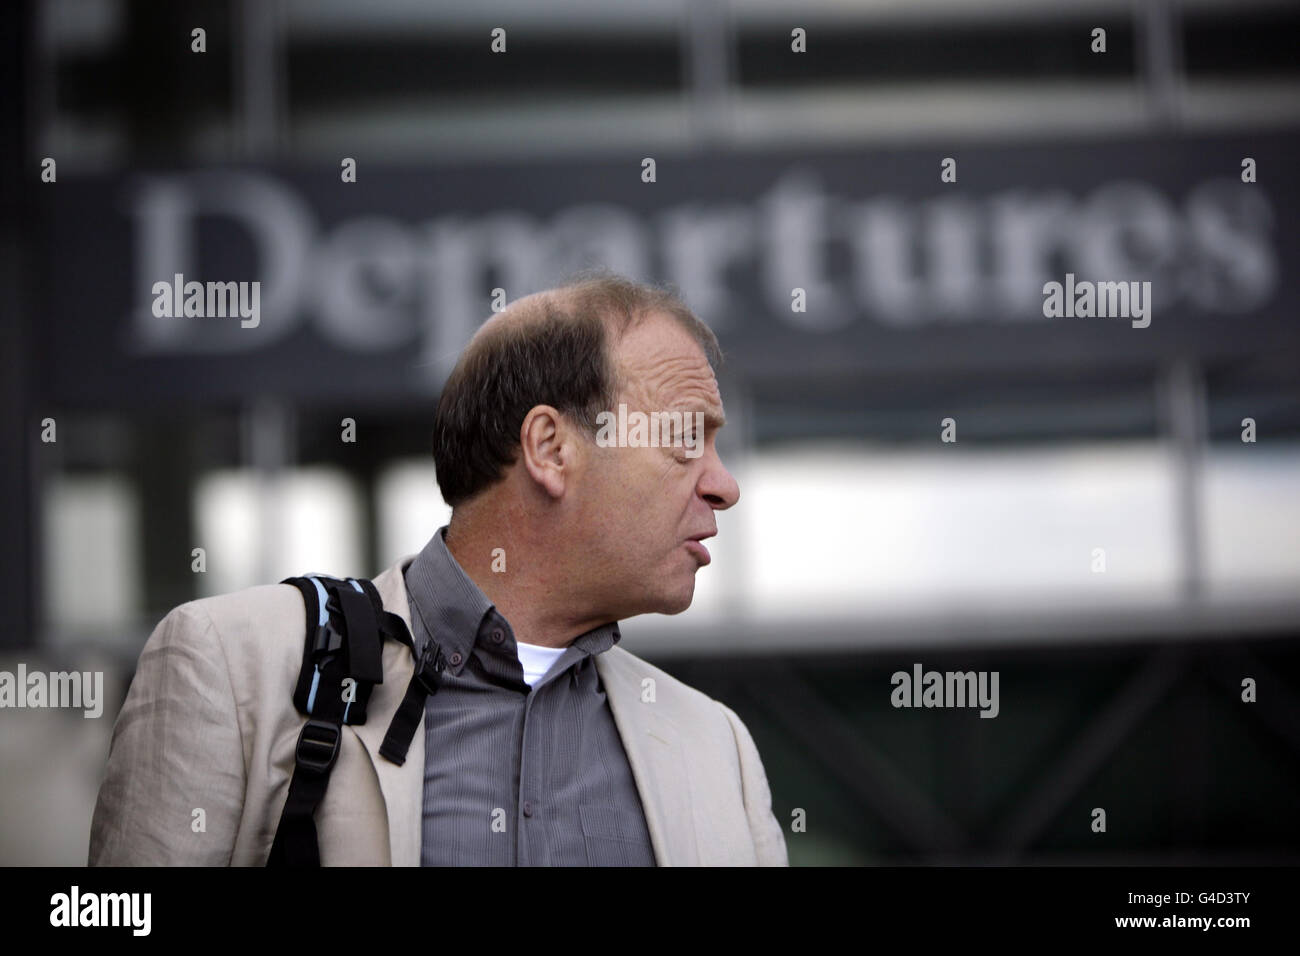 Bill Hawker, the father of British teacher, Lindsay Ann Hawker who was murdered in Japan arrives at Terminal 3 of Heathrow Airport, London, as the Hawker family leave for Japan. Stock Photo